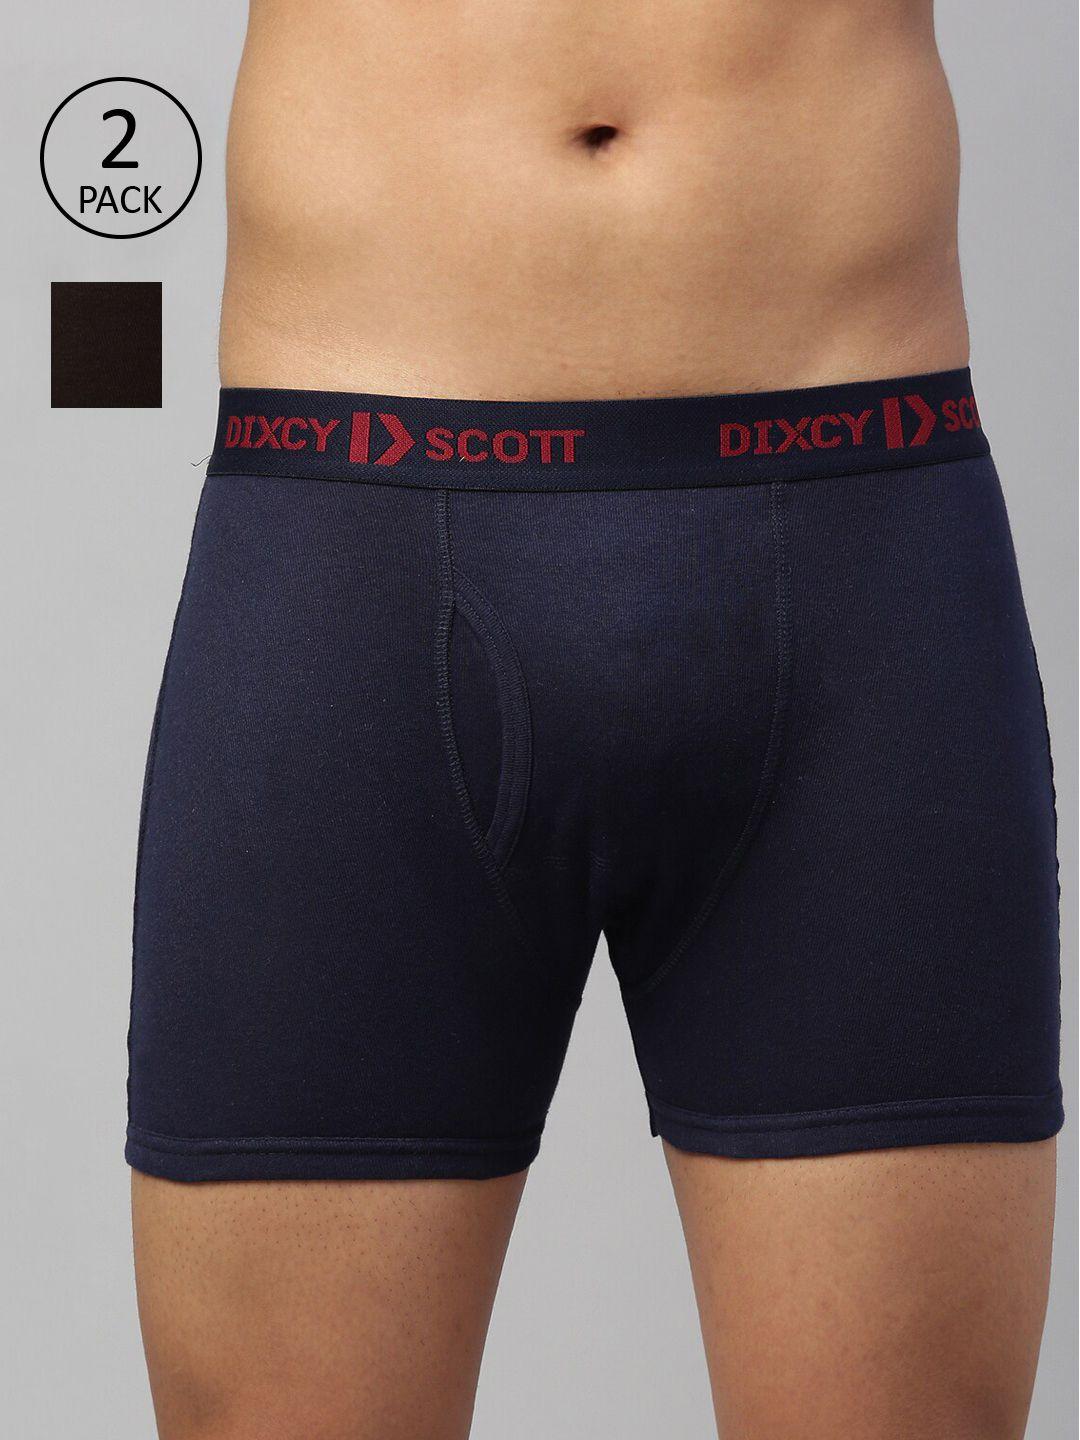 dixcy scott maximus men pack of 2 solid cotton trunks maxt-003-kinetic trunk-p2